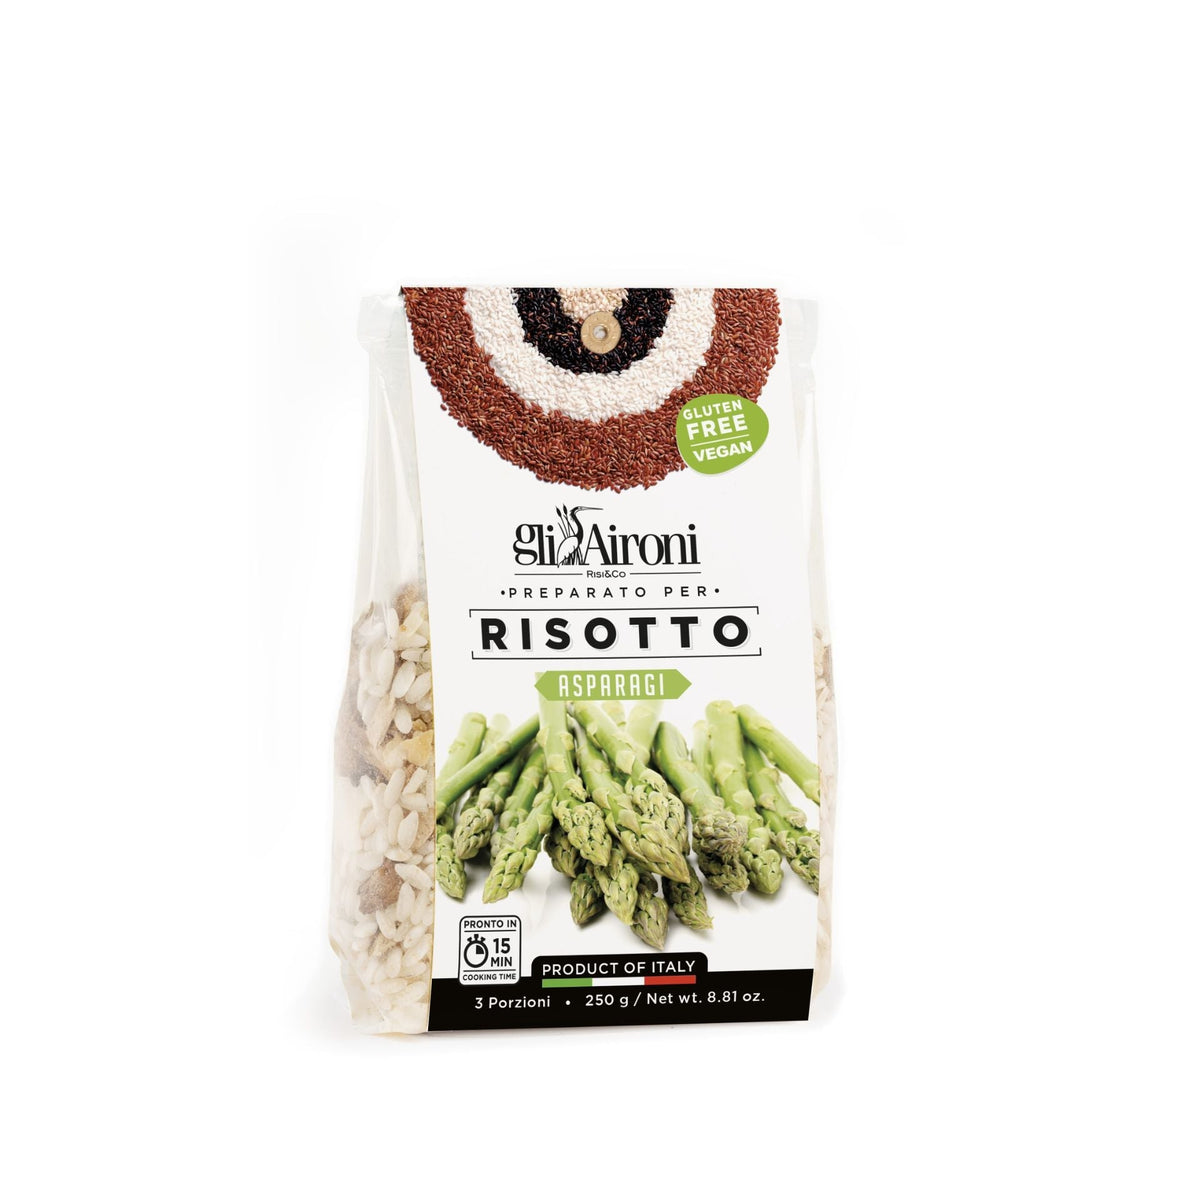 Gli Aironi Asparagus Risotto 250g (Bag)  | Imported and distributed in the UK by Just Gourmet Foods